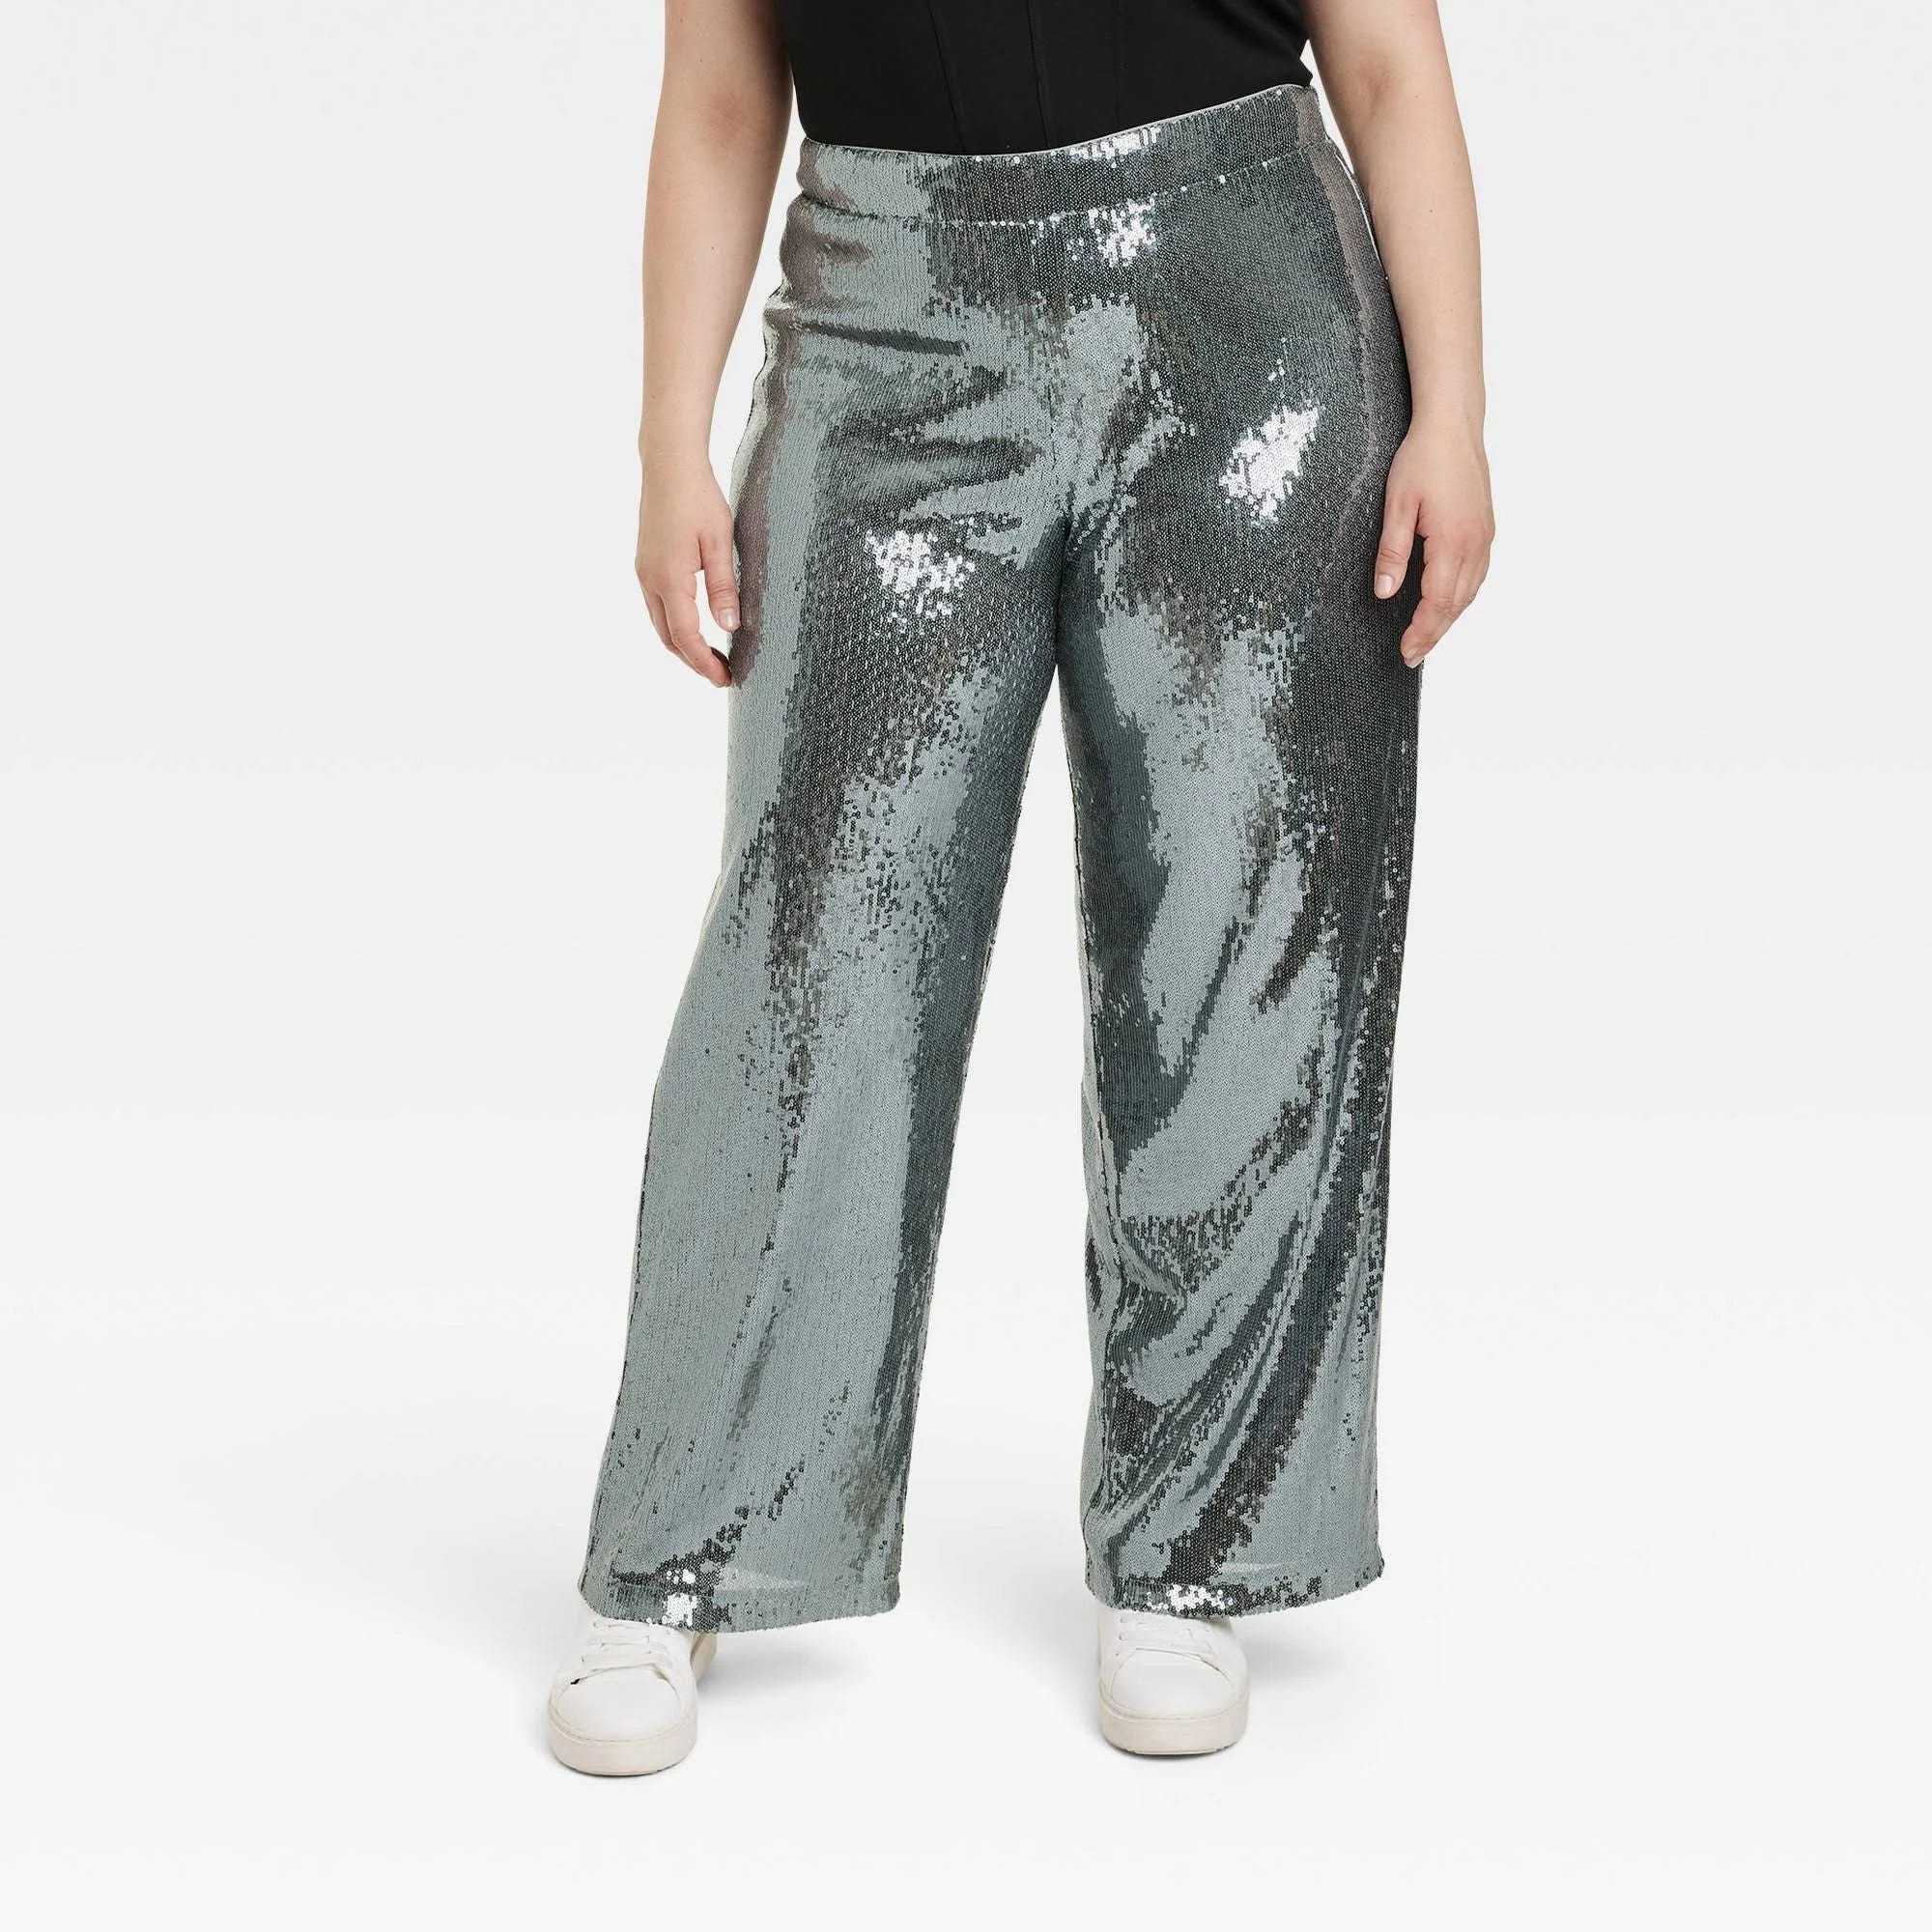 Sparkle in Style: Women's Glitter Pants for Every Event | Image